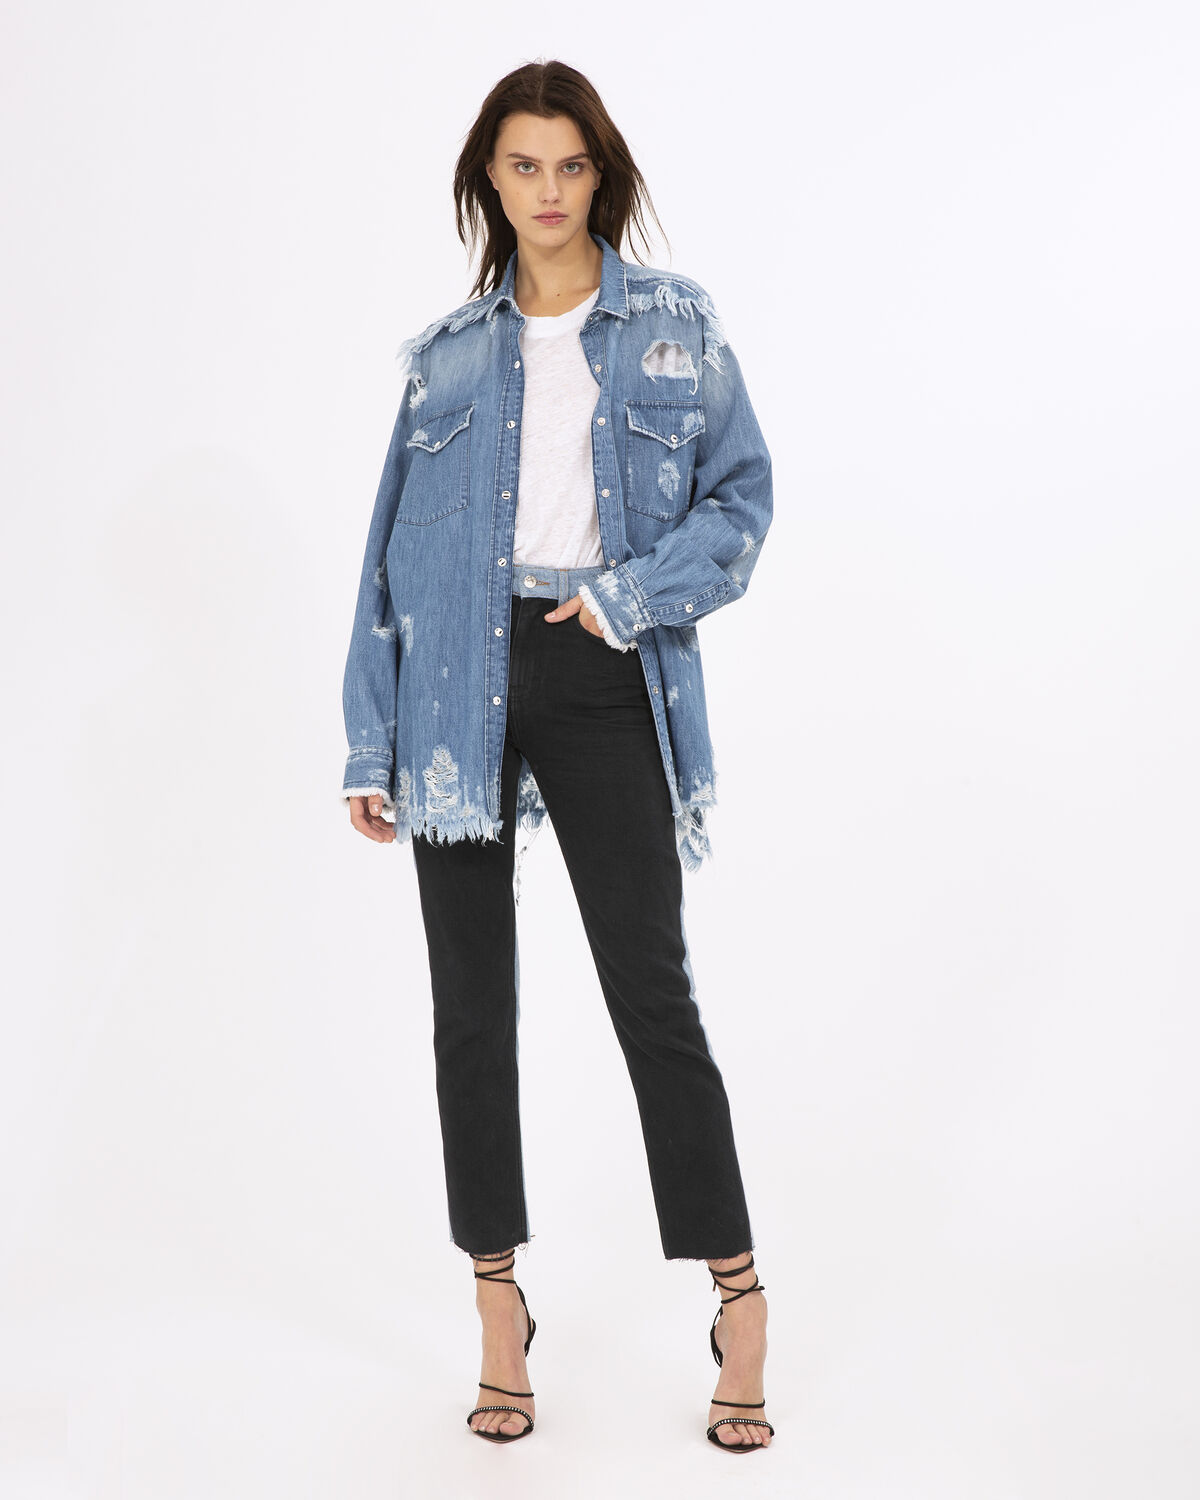 Photo of IRO Paris Upbeat Shirt Blue - Directly Inspired By The Men's Wardrobe, This Denim Shirt Is A Must This Season. Oversize, It Combines Fringes And Distressed Details For A Resolutely Rock Look. Shirts-Tops